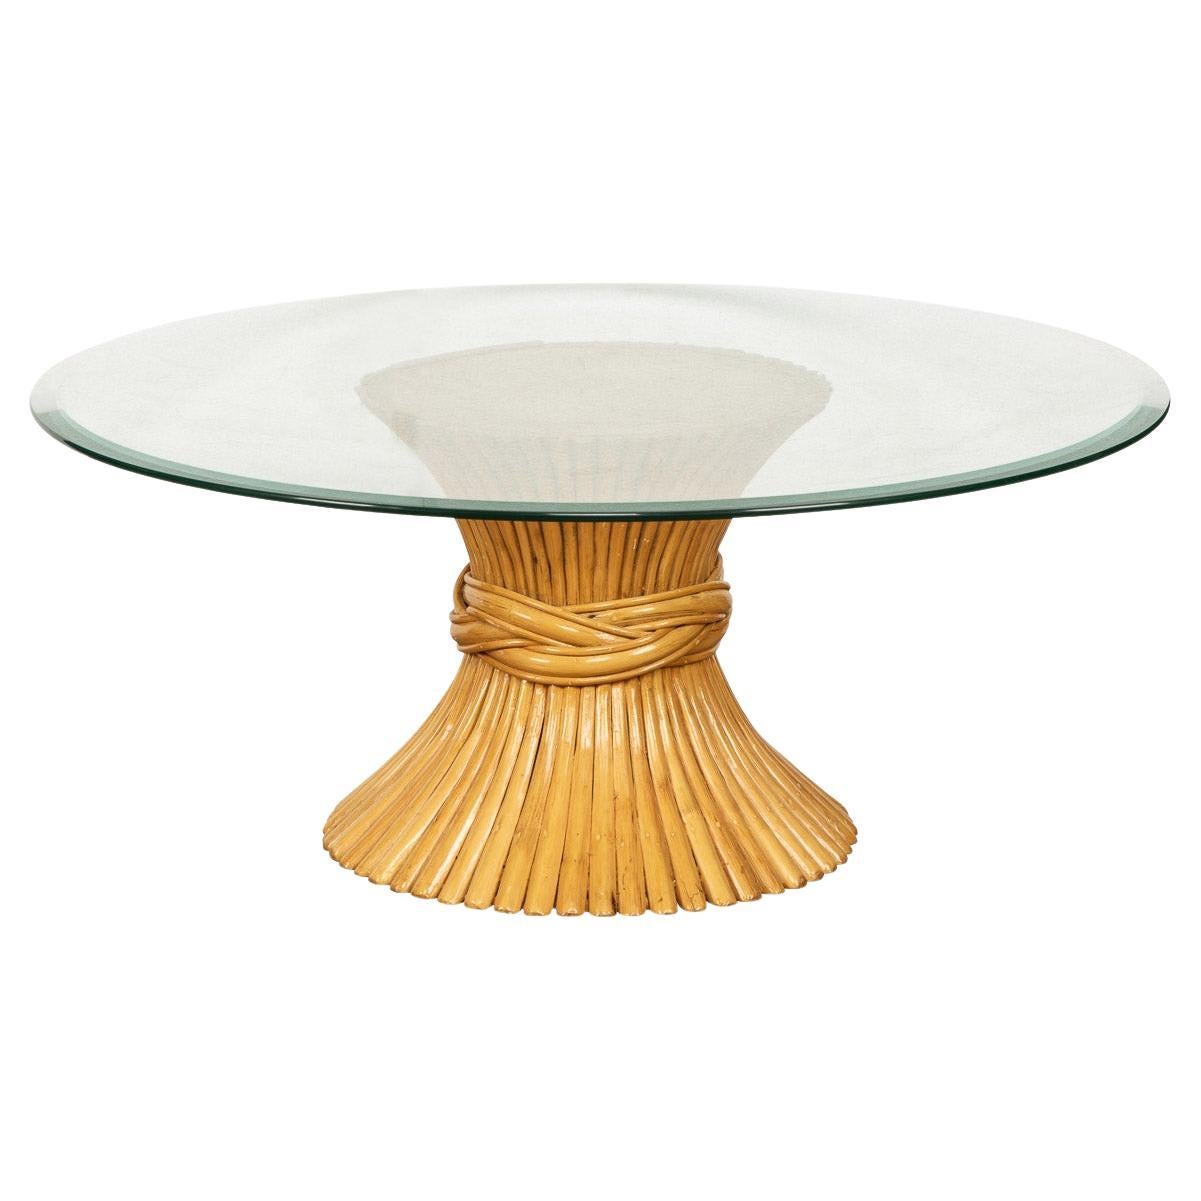 20th Century "Sheaf Of Wheat" Coffee Table by Mcguire, c.1970 For Sale